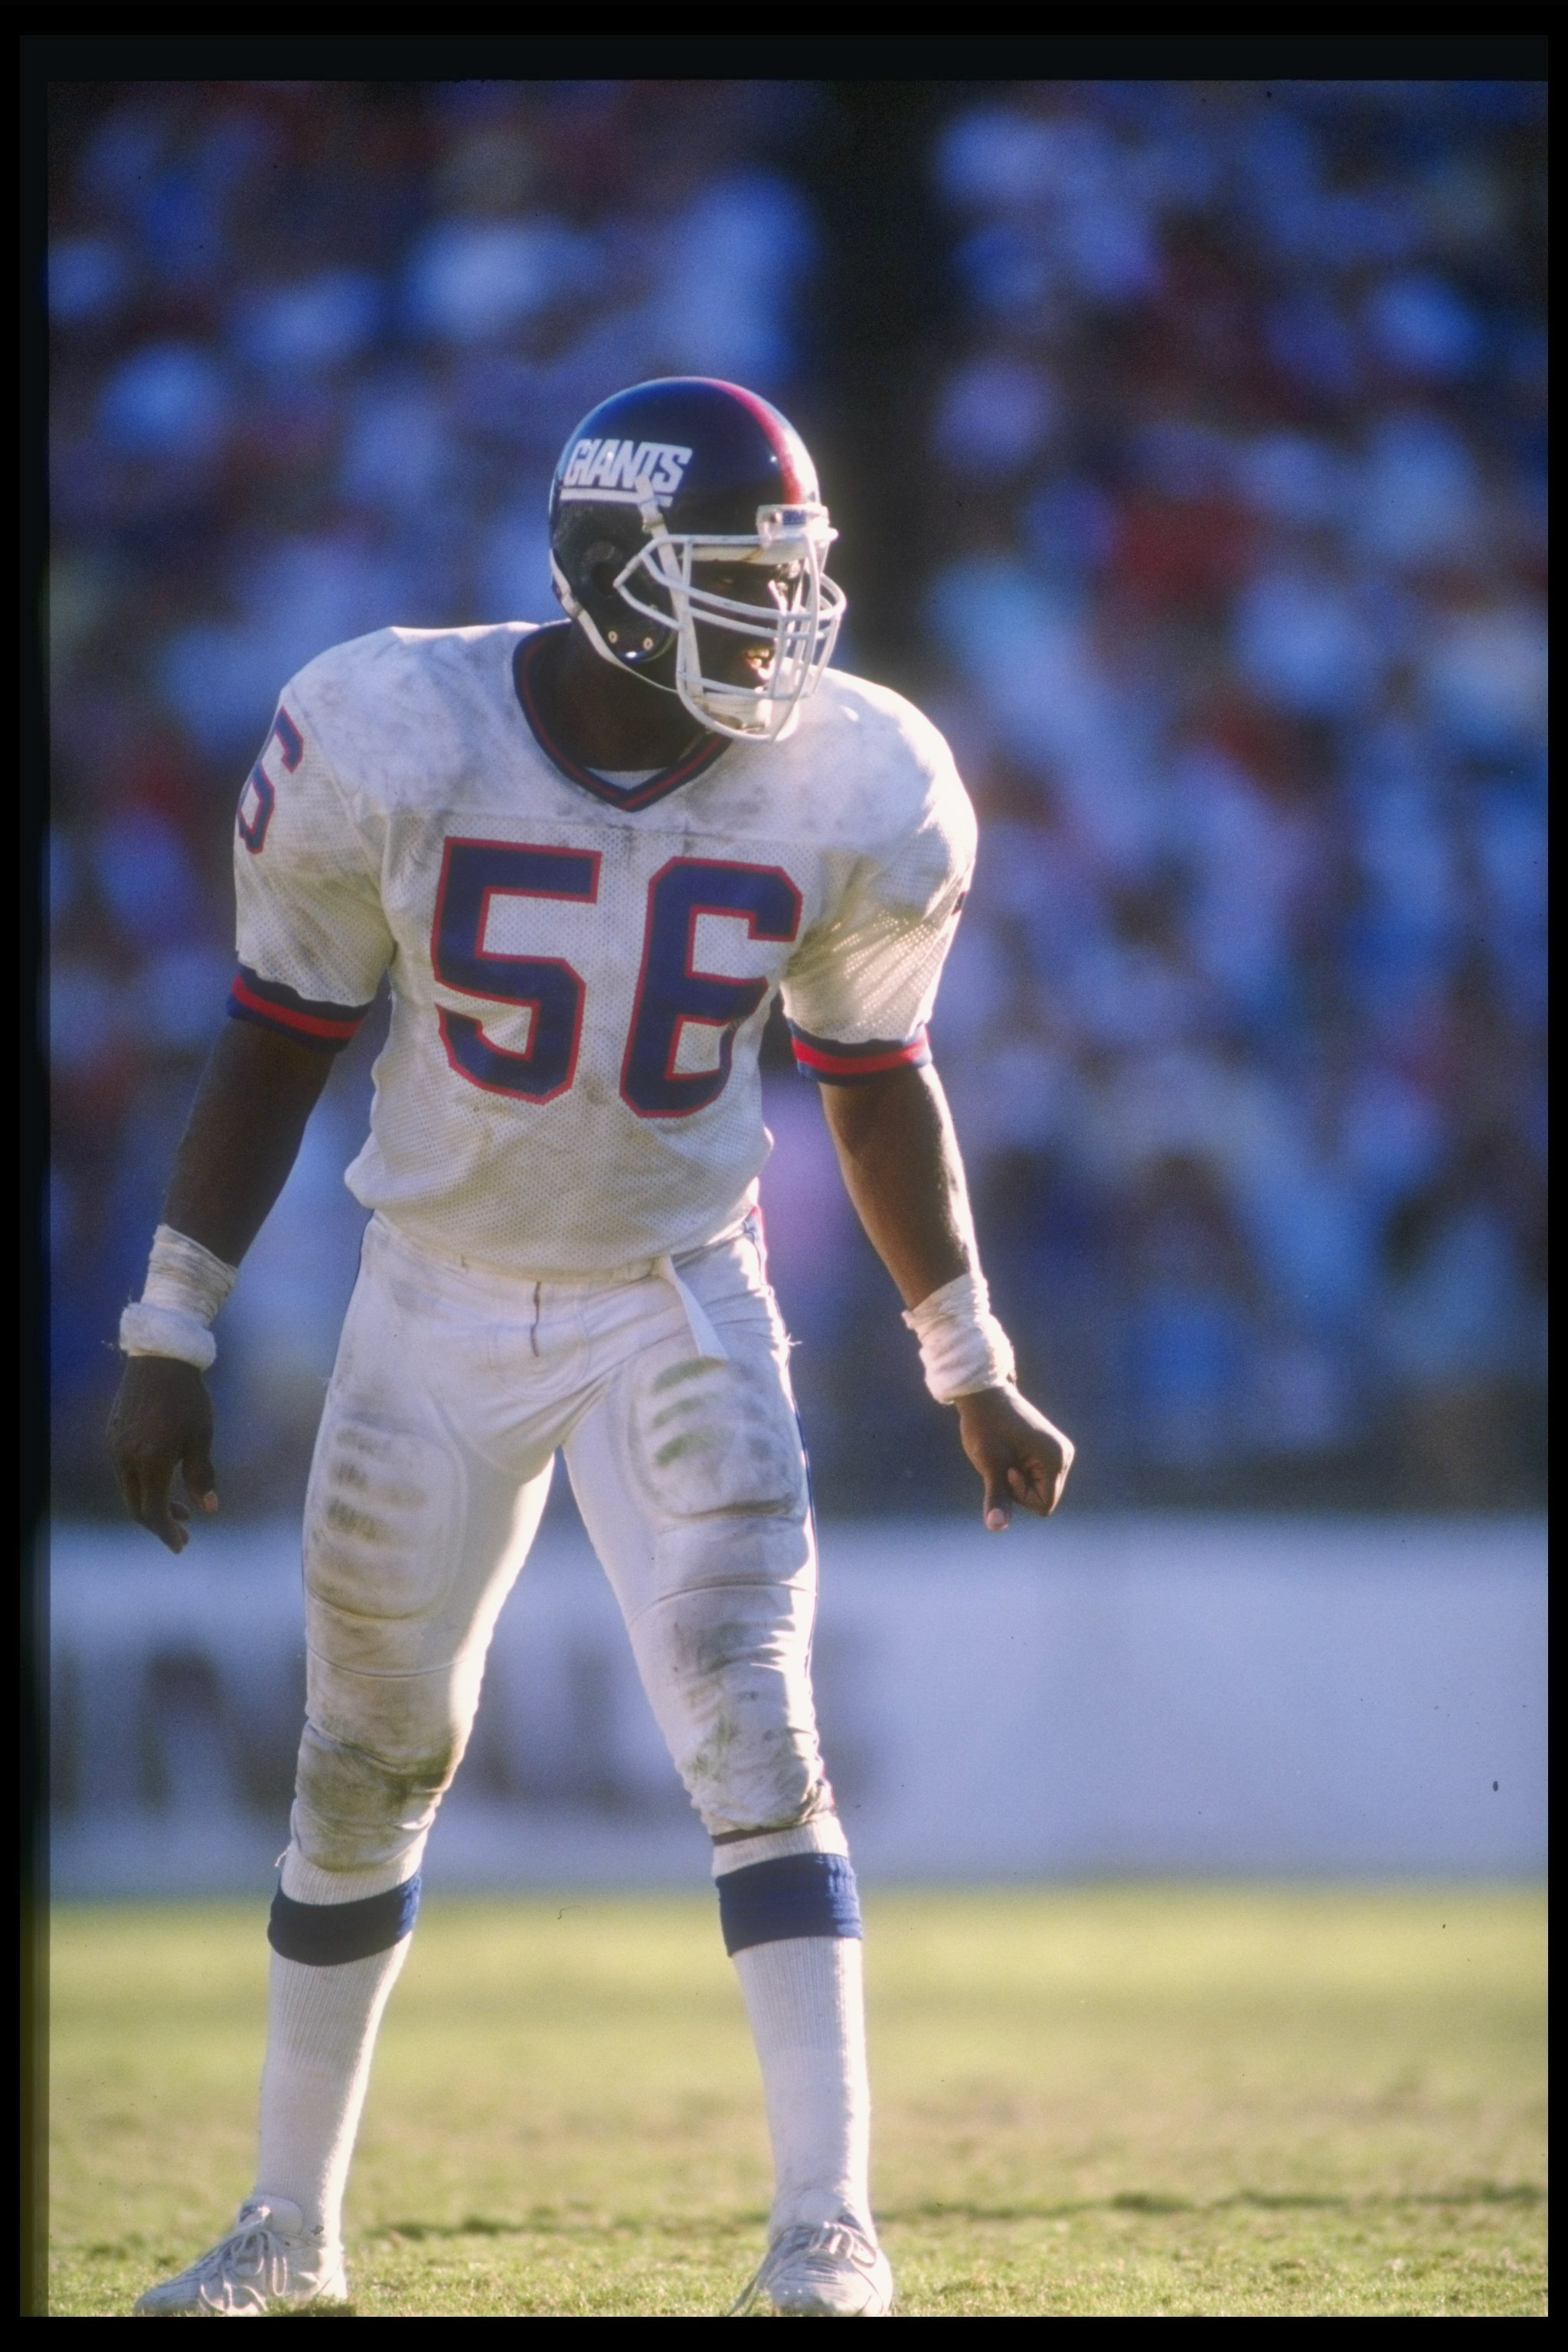 nfl lawrence taylor draft pick each round history powell mike giants highlights linebacker franchise getty 1988 york